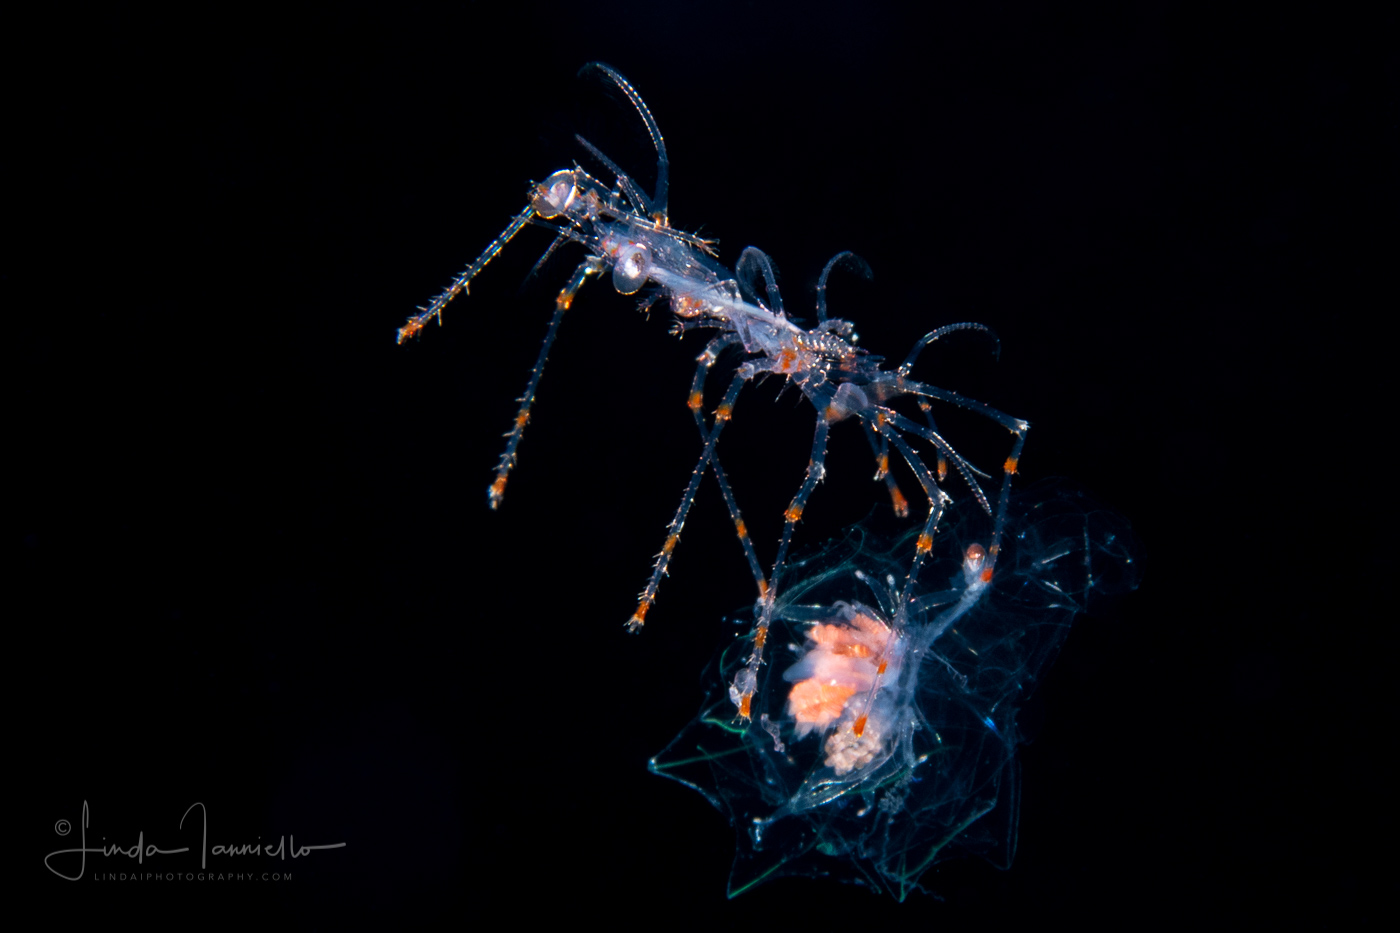 Caribbean Spiny Lobster - Palinuridae - Phyllosoma Stage Larva - with a Siphonophore